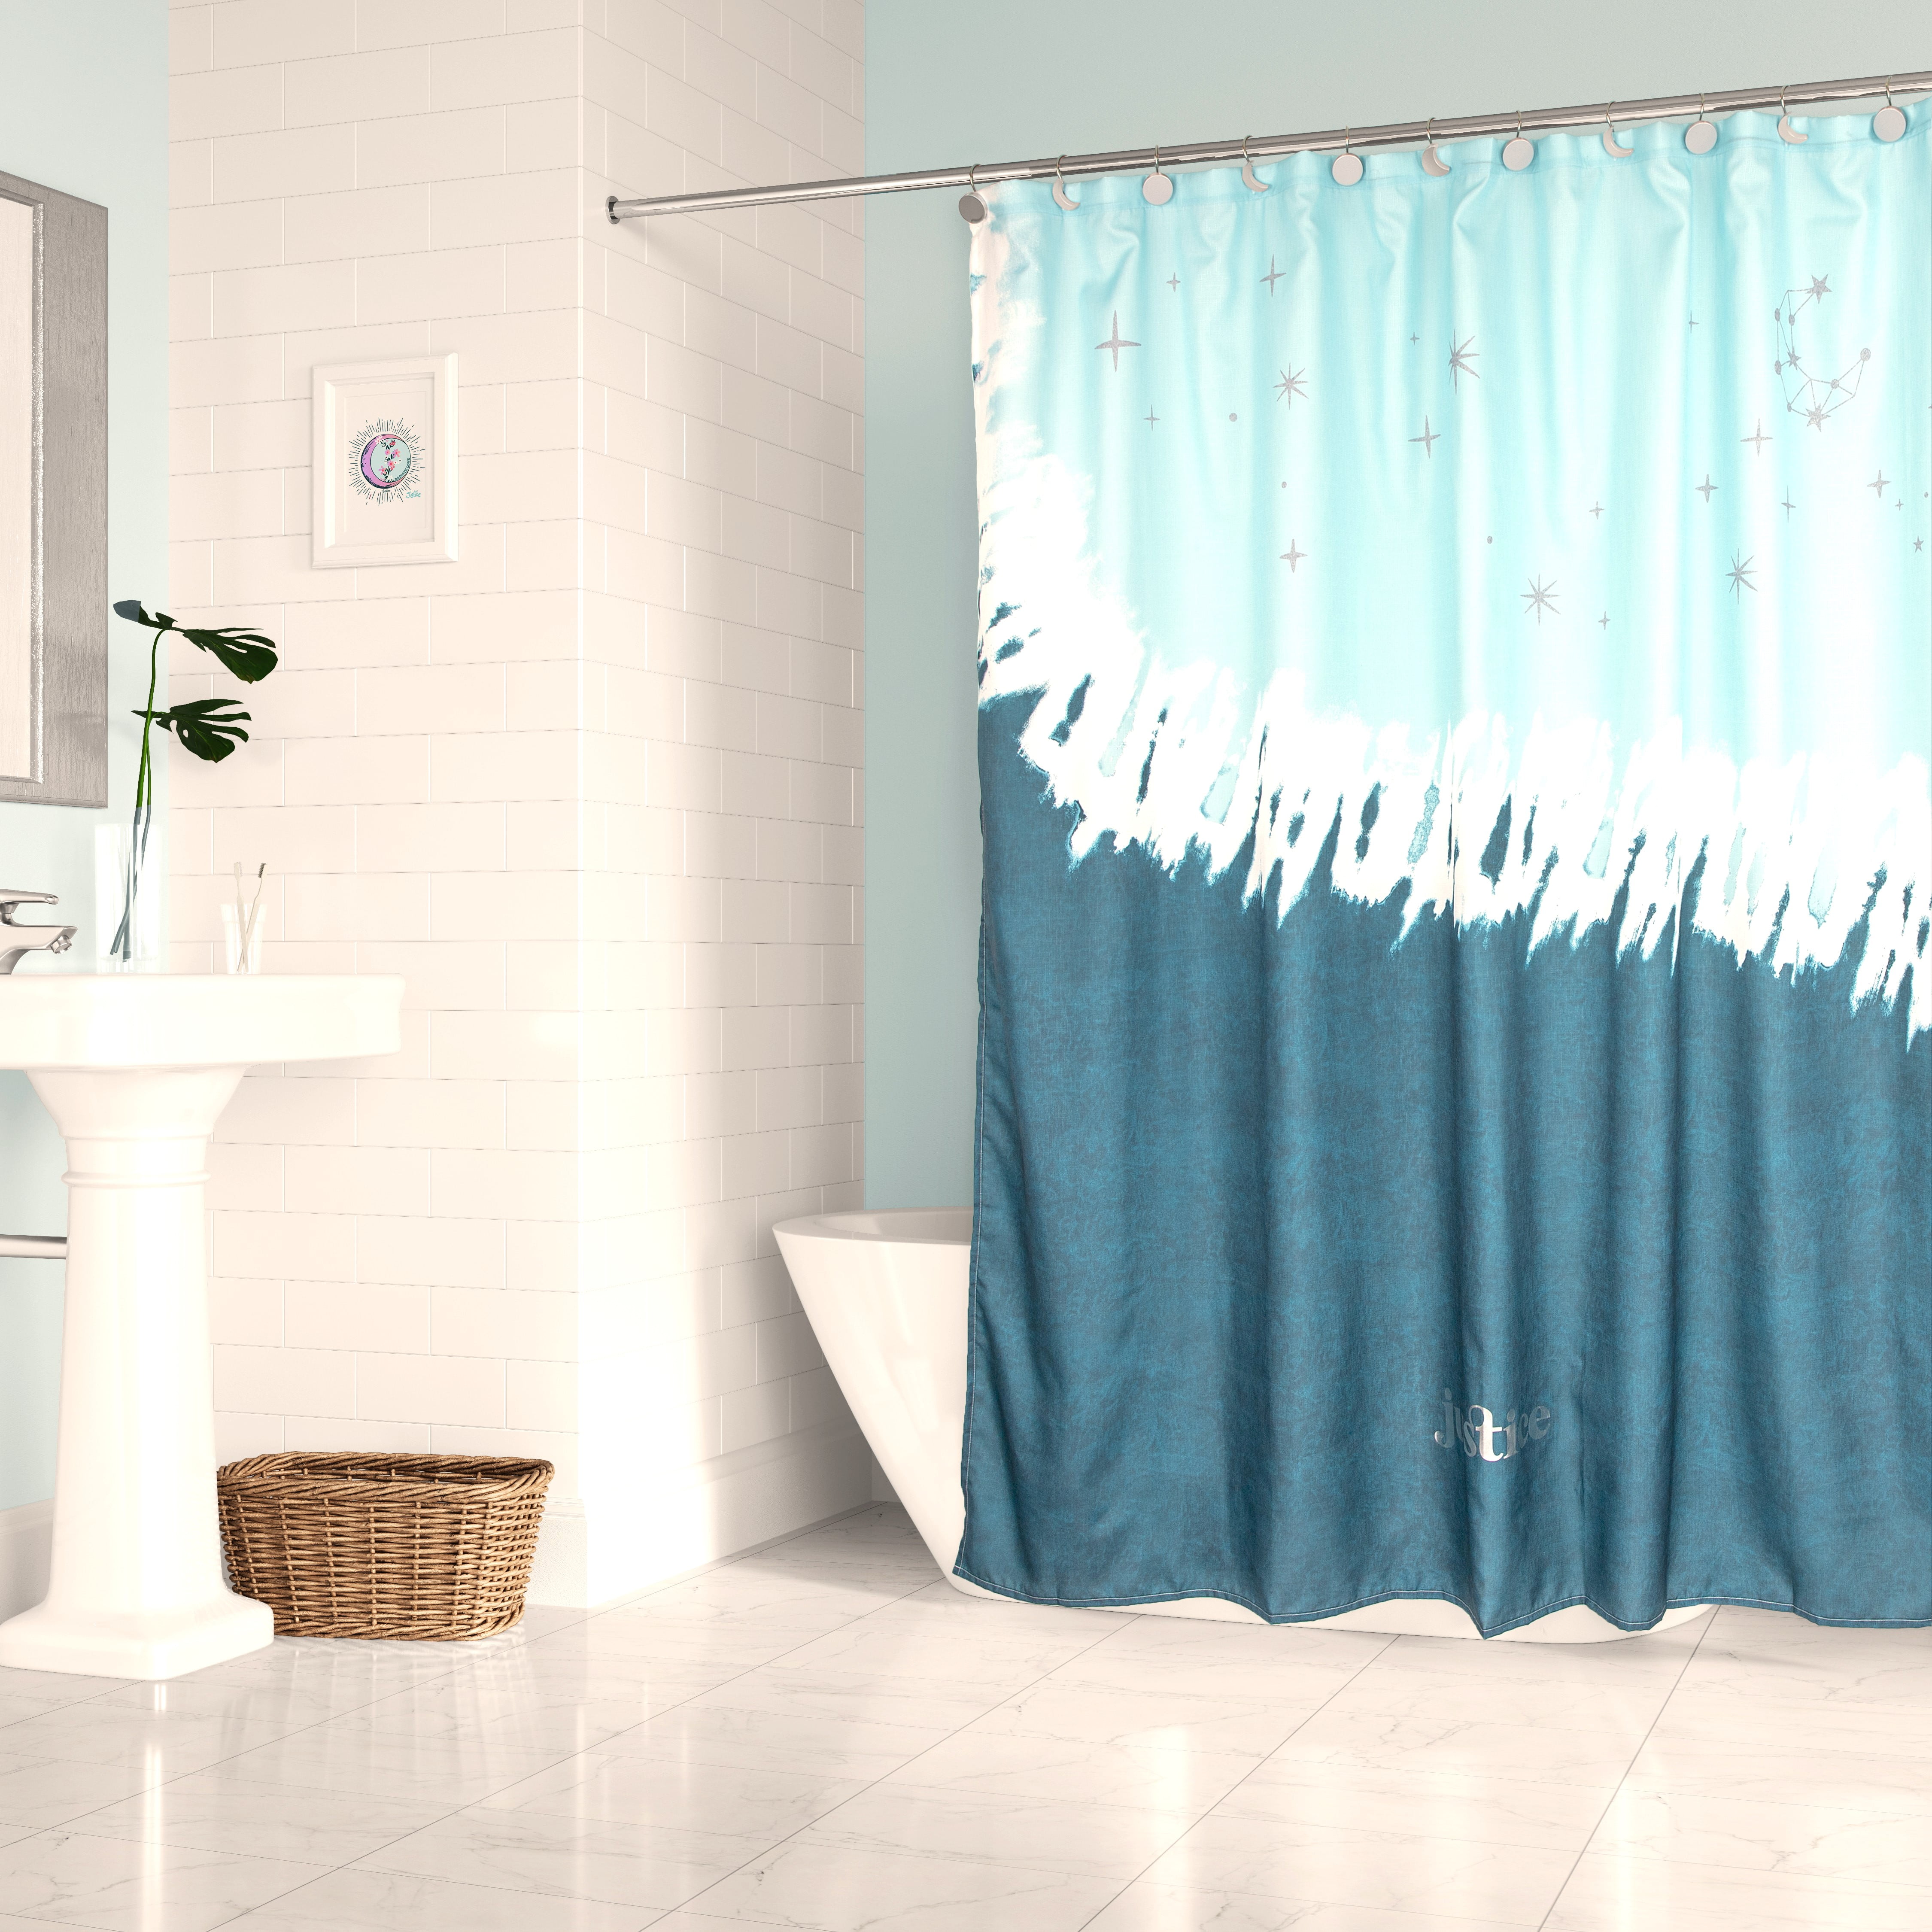 Drinks Sky Colored Cocktails Shower Curtain Bathroom Mat Waterproof Fabric Hooks 